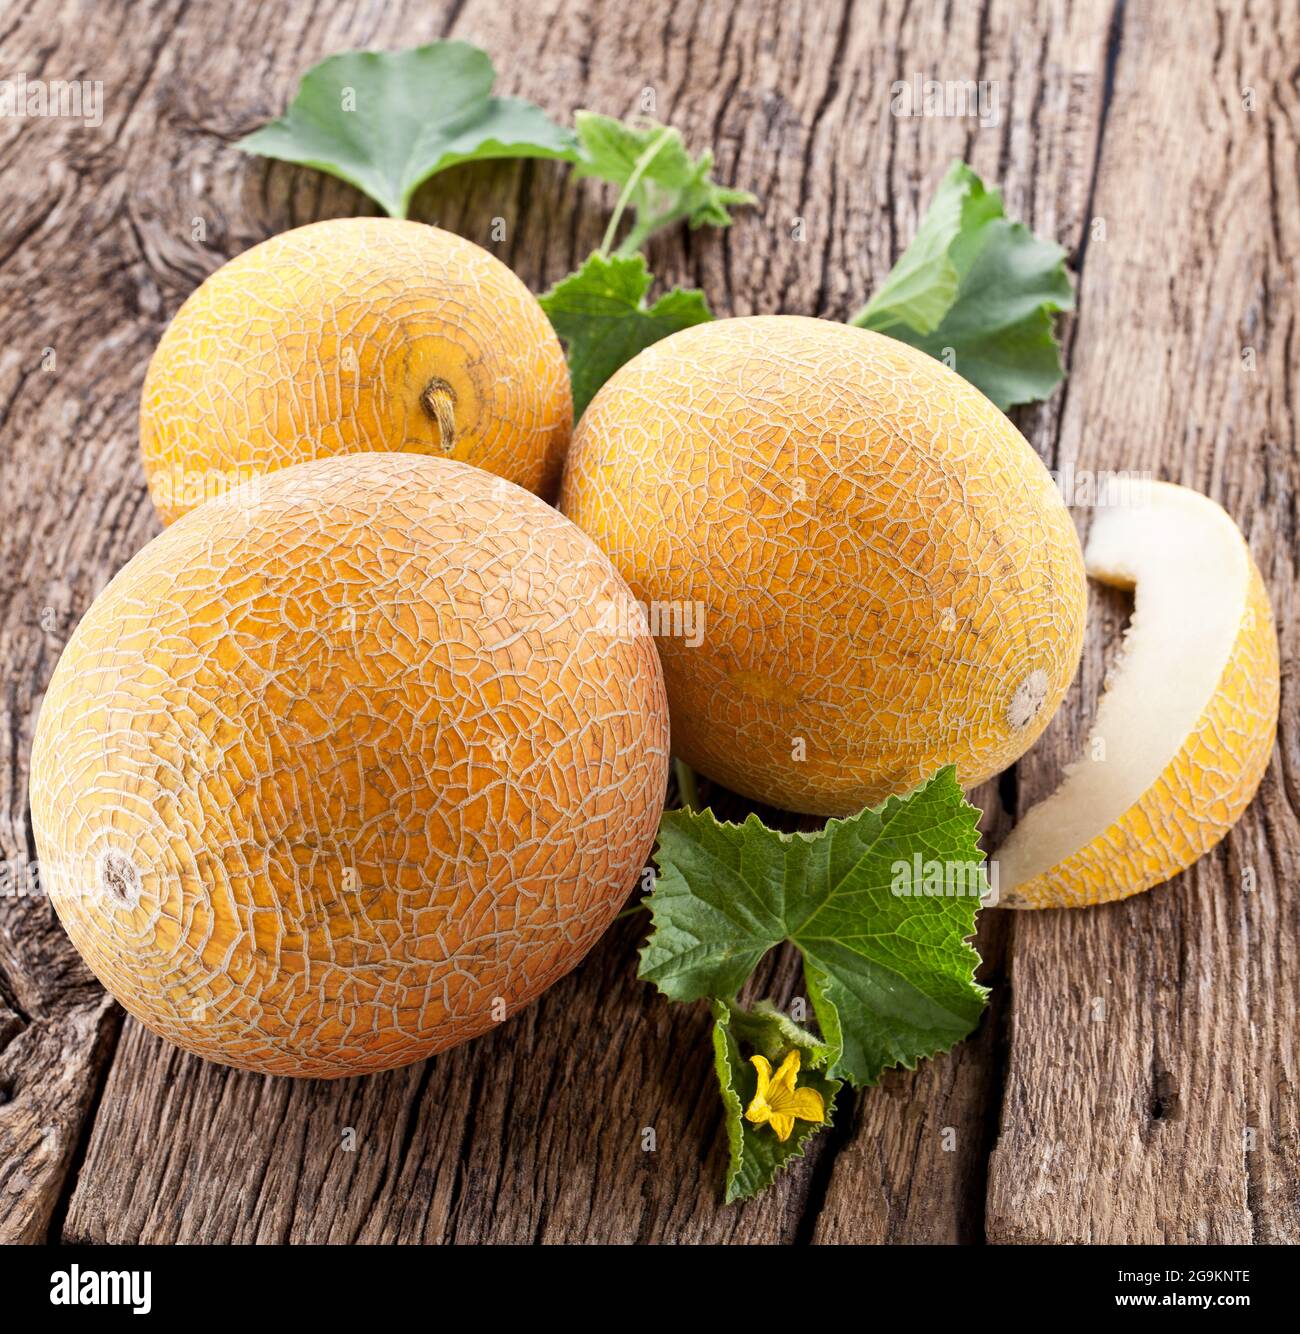 Ripe yellow melon with slices and melon leaves on a old wooden table. Stock Photo